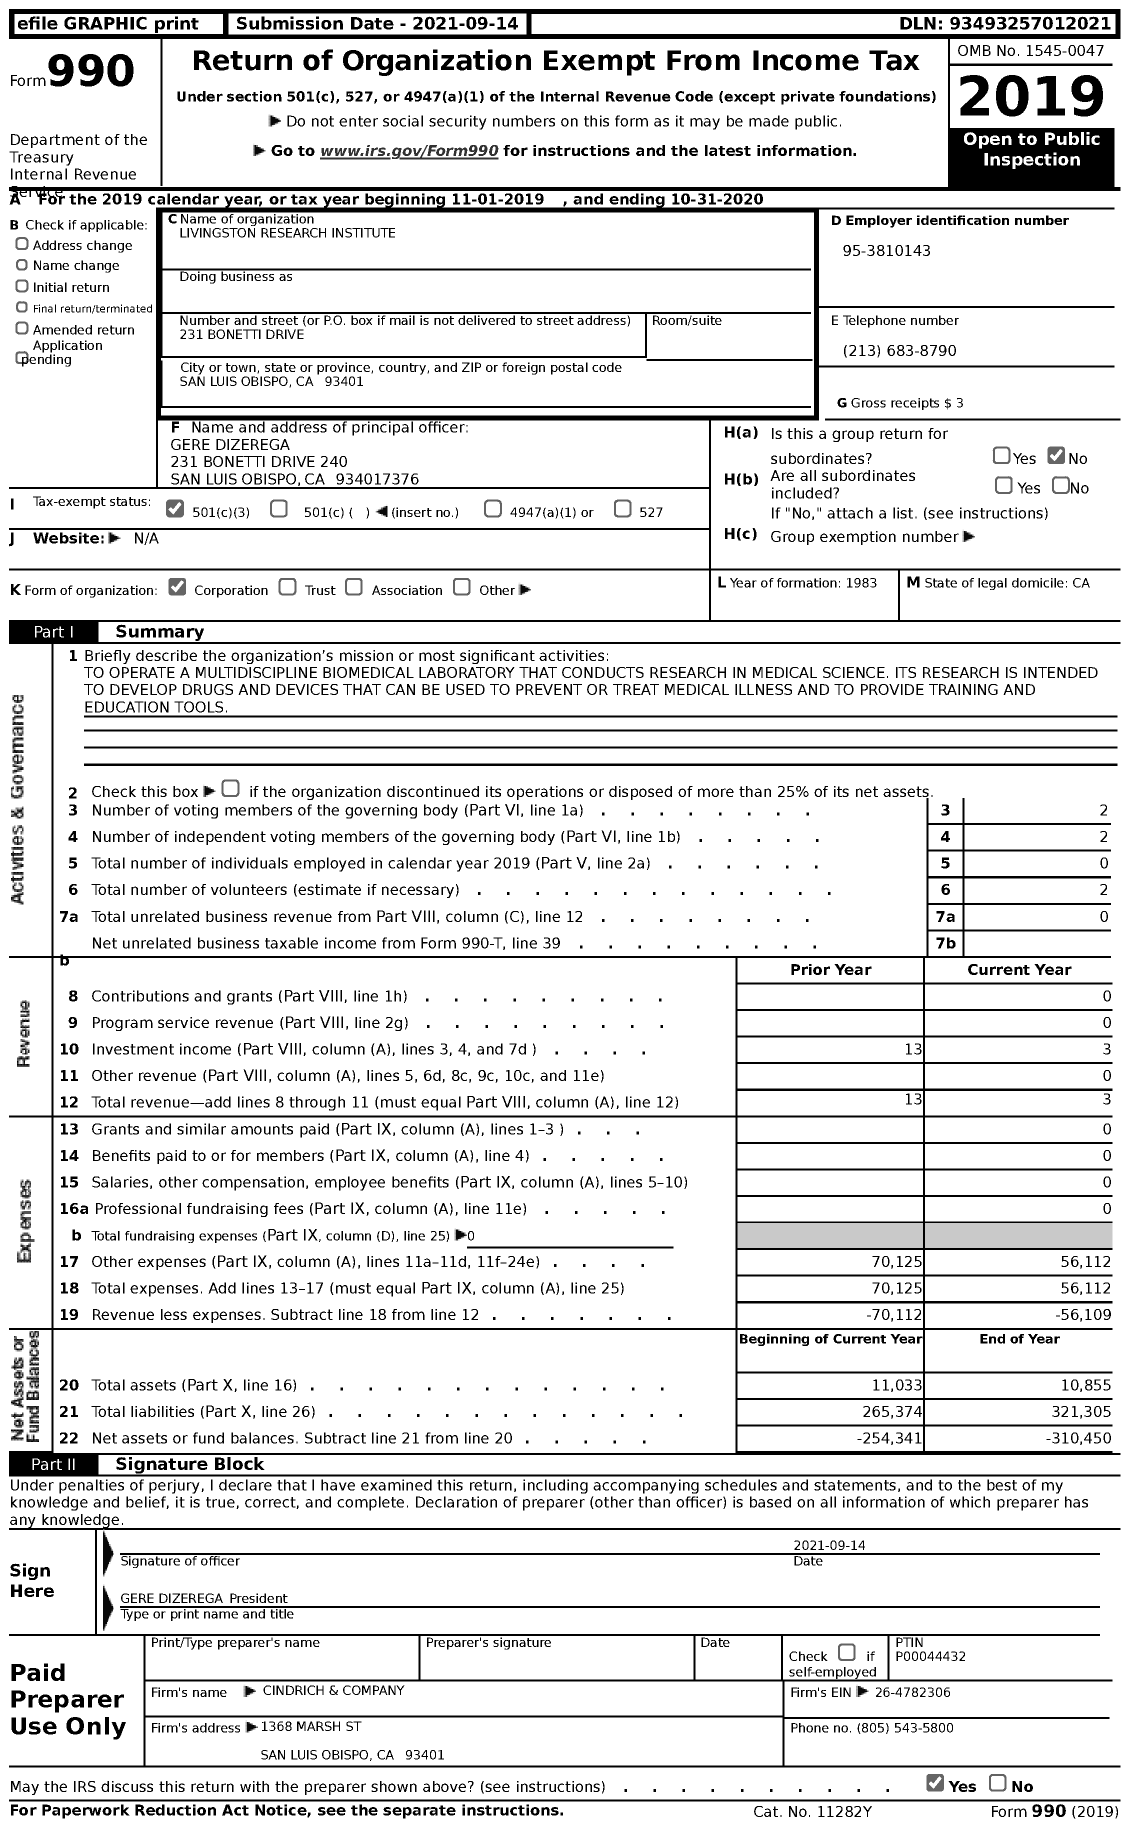 Image of first page of 2019 Form 990 for Livingston Research Institute